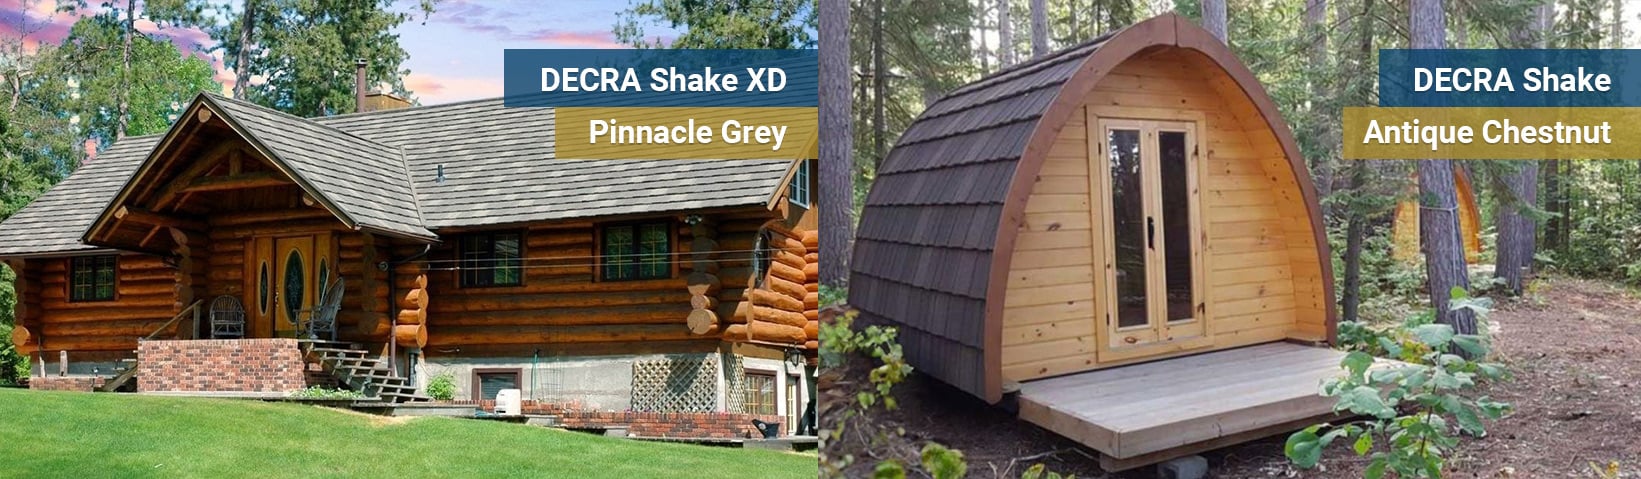 decra-metal-roofing-web-metal-roofing-products-side-by-side-shake-shake-xd